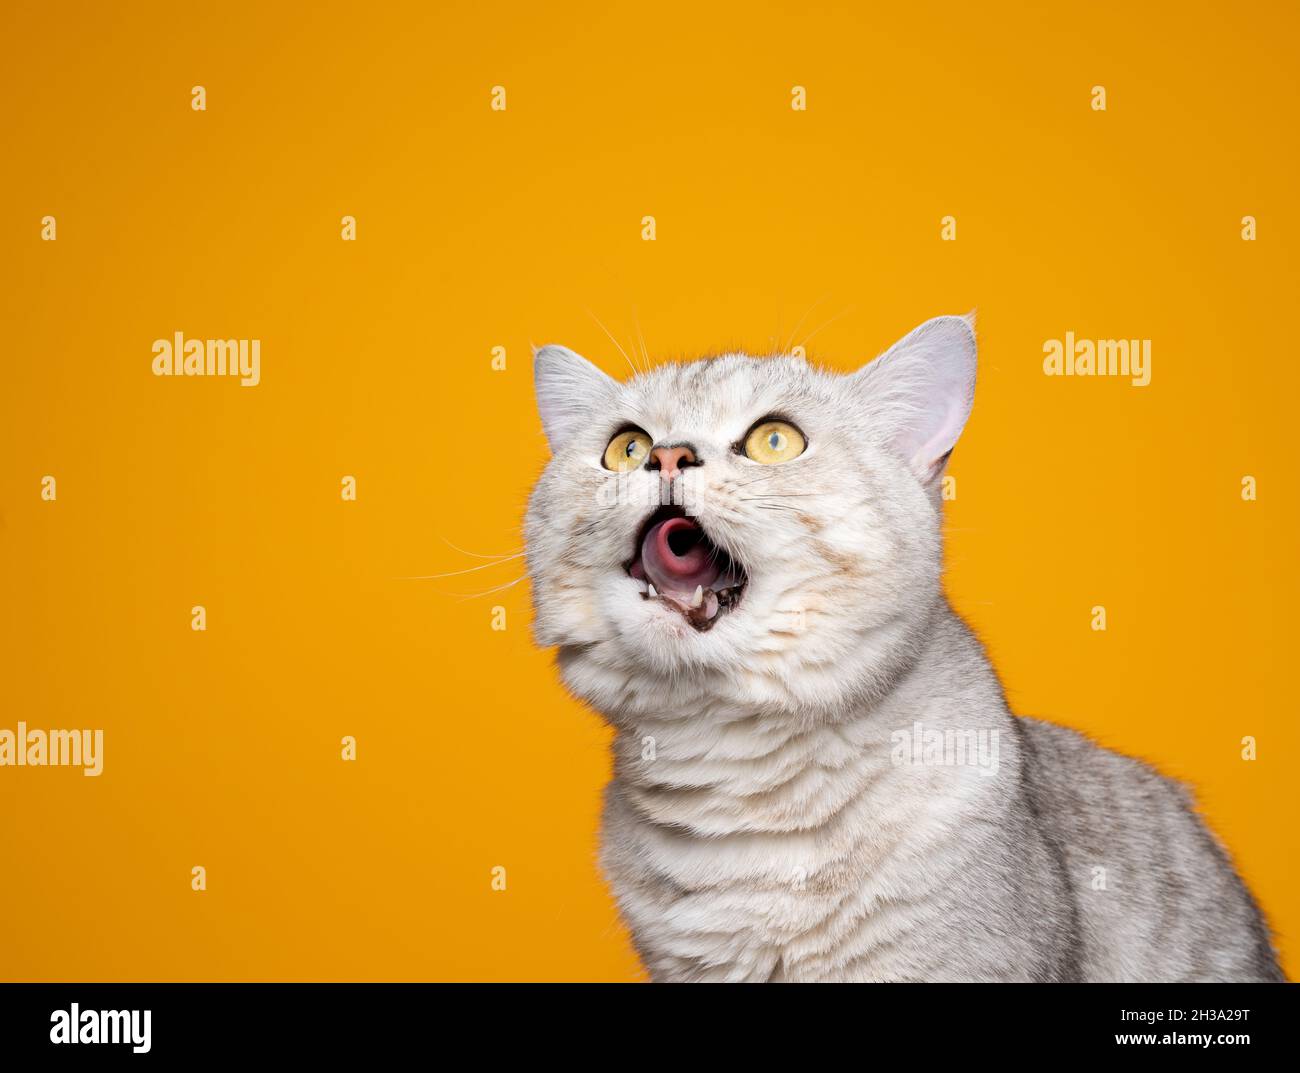 hungry silver tabby british shorthair cat rolling tongue licking lips while looking up curiously on yellow background with copy space Stock Photo